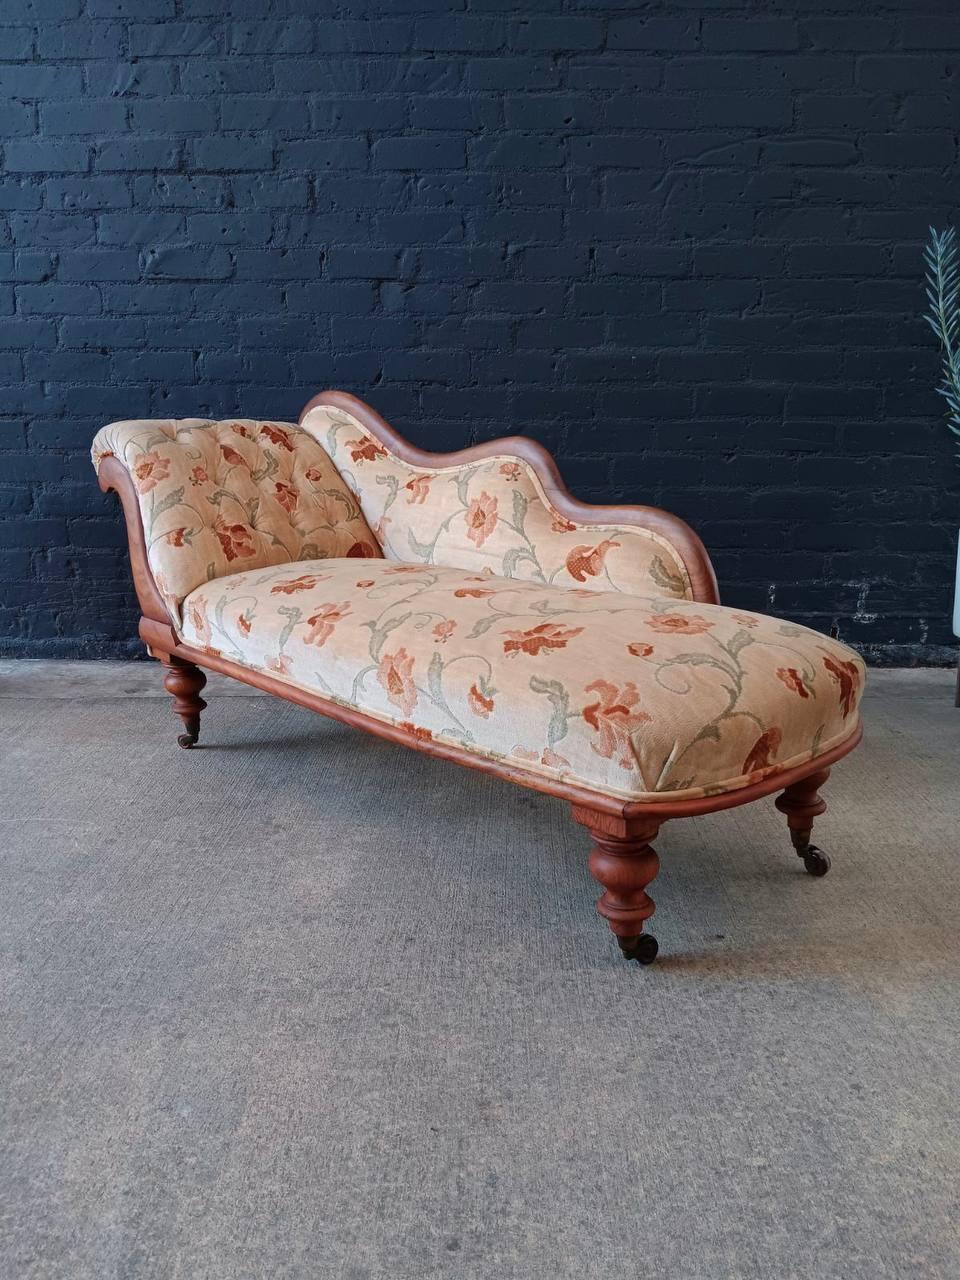 Fabric Antique Empire Style Chaise Lounge